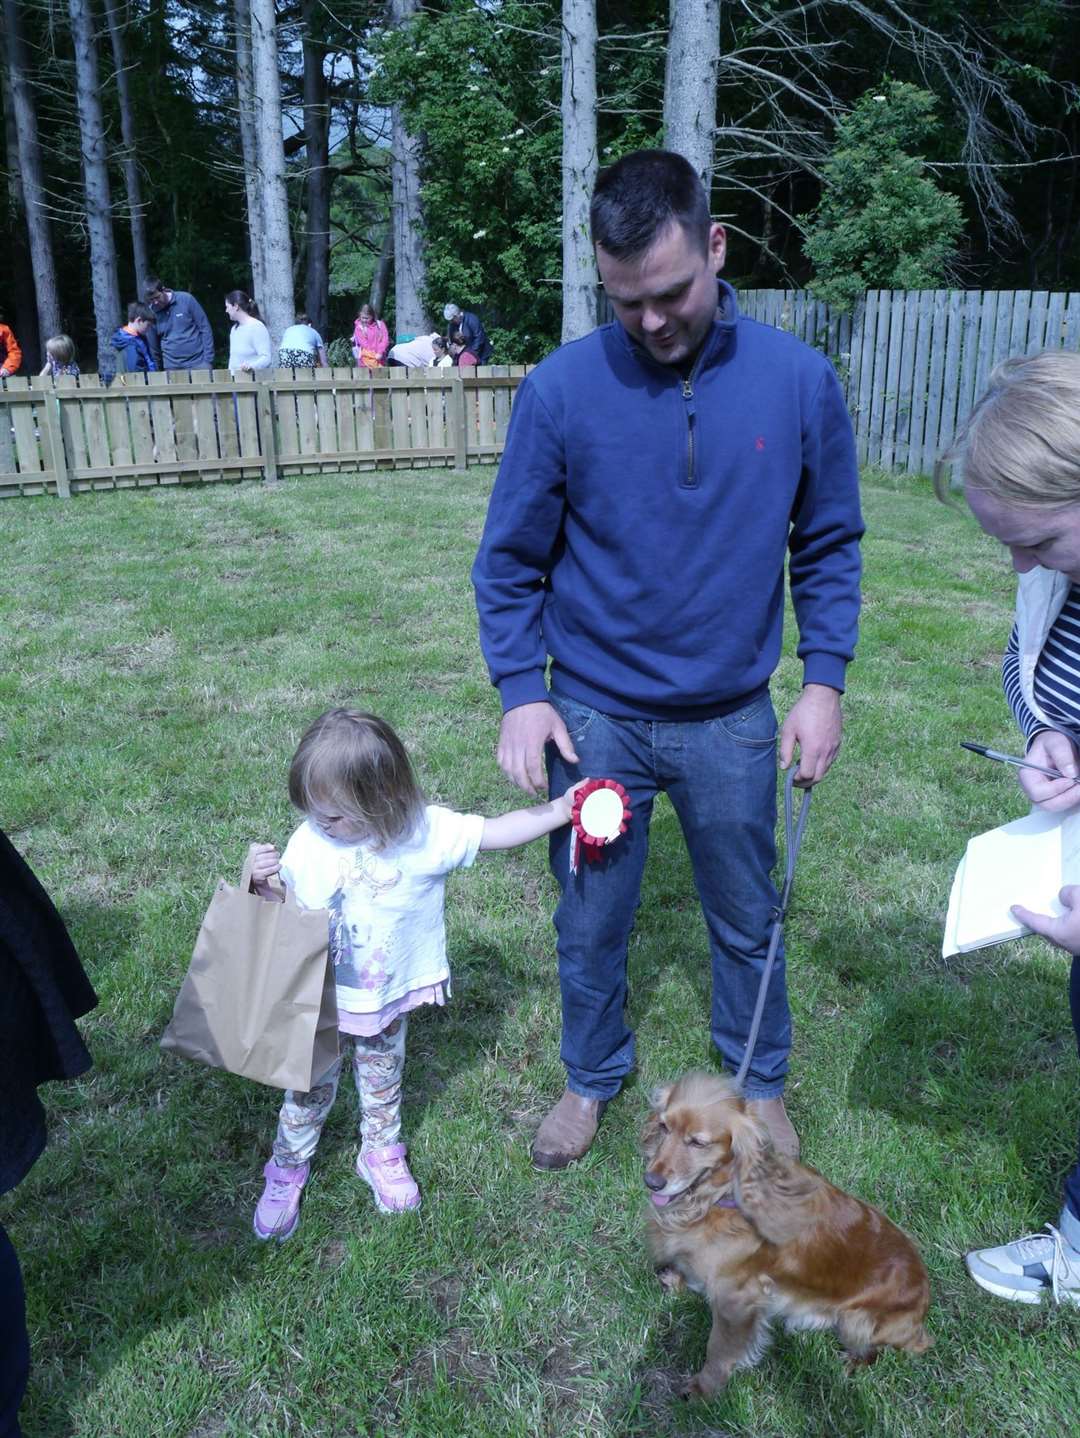 The day's waggiest tail prize was awarded to Fern, a Cocker Spaniel owned by Gartly resident George Innes.